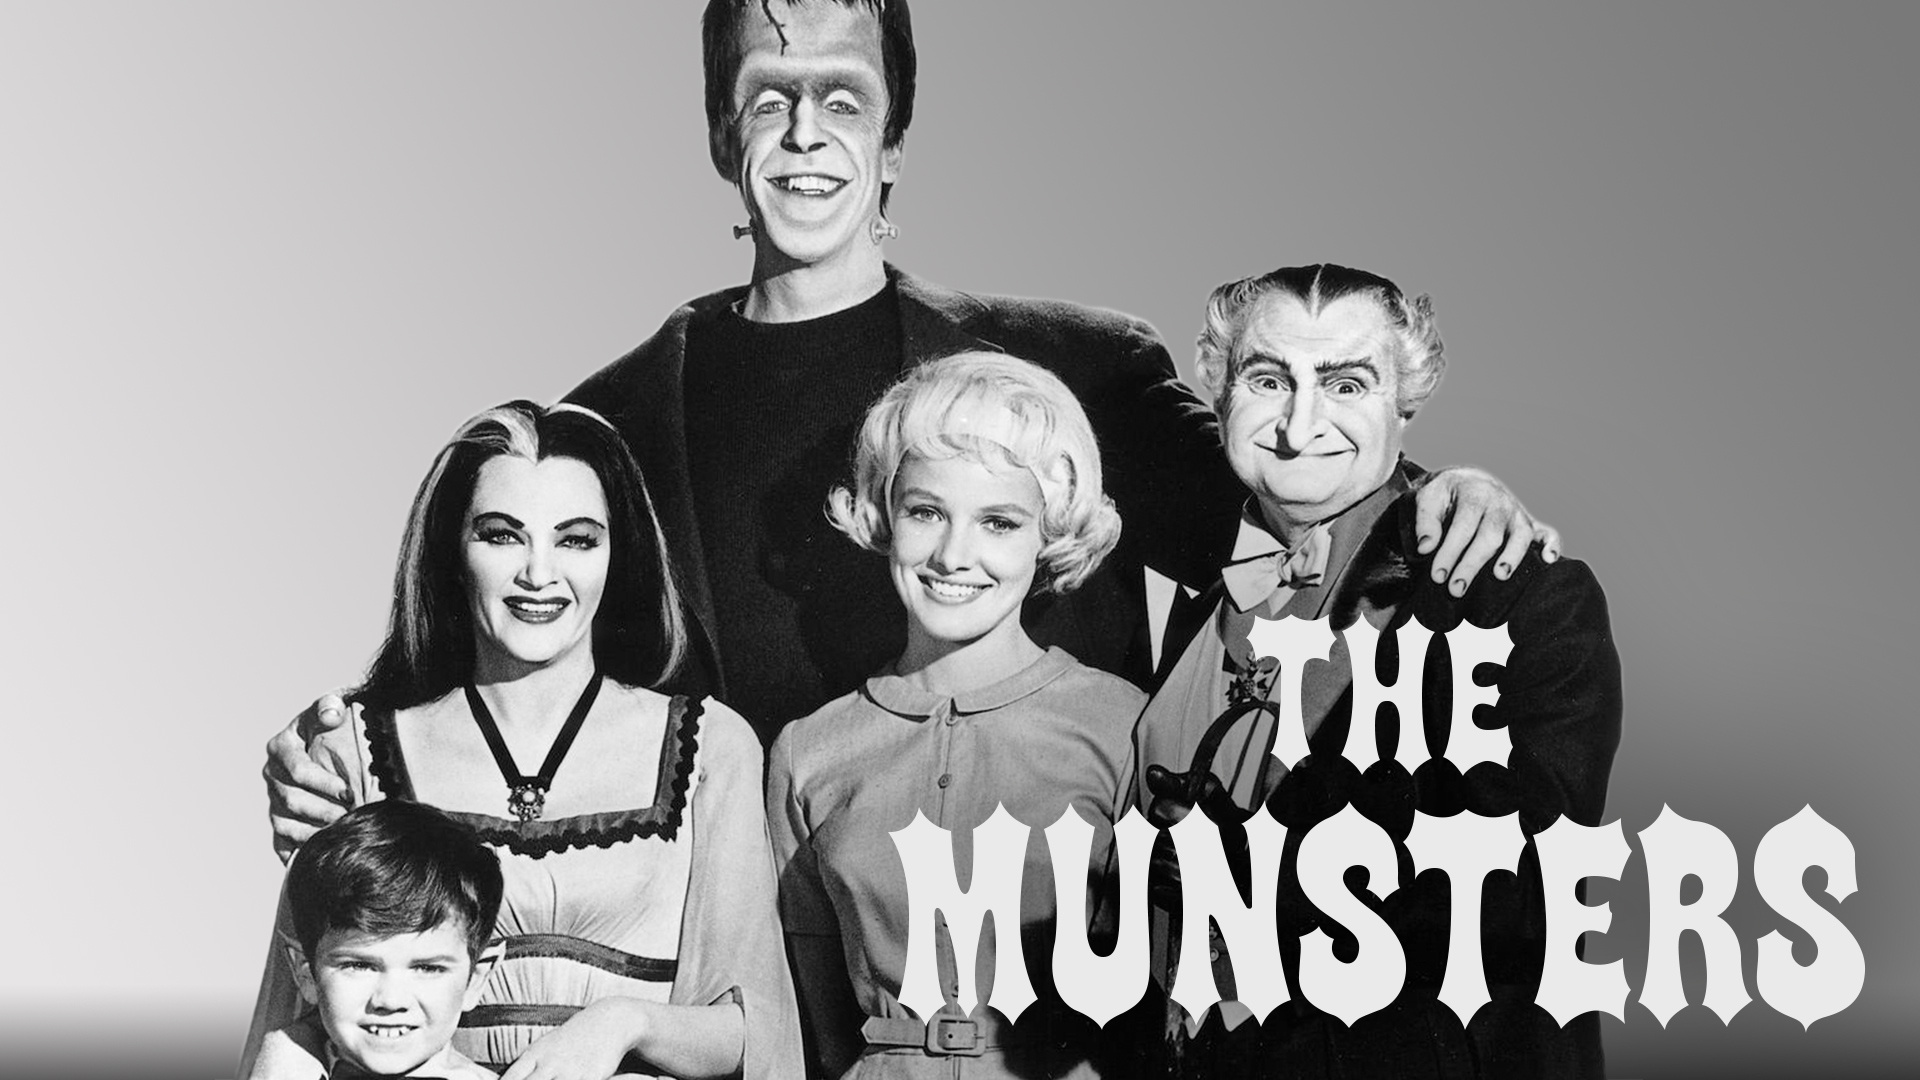 The Munsters, TV series, Radio times, Classic television, 1920x1080 Full HD Desktop